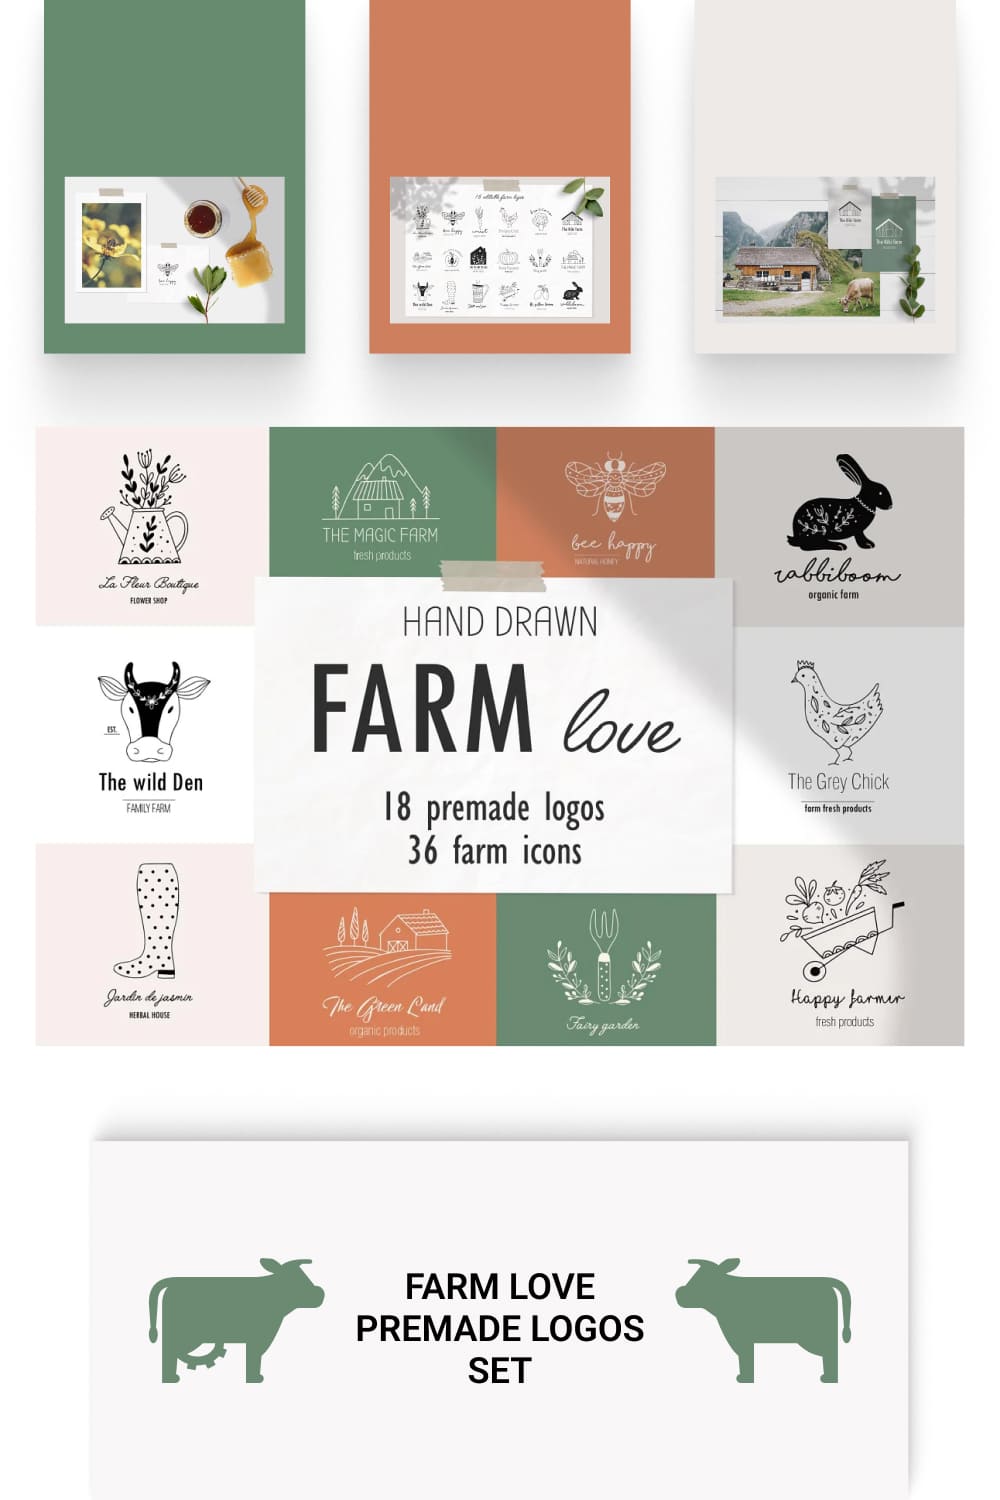 Diverse of farm logos for different purposes.